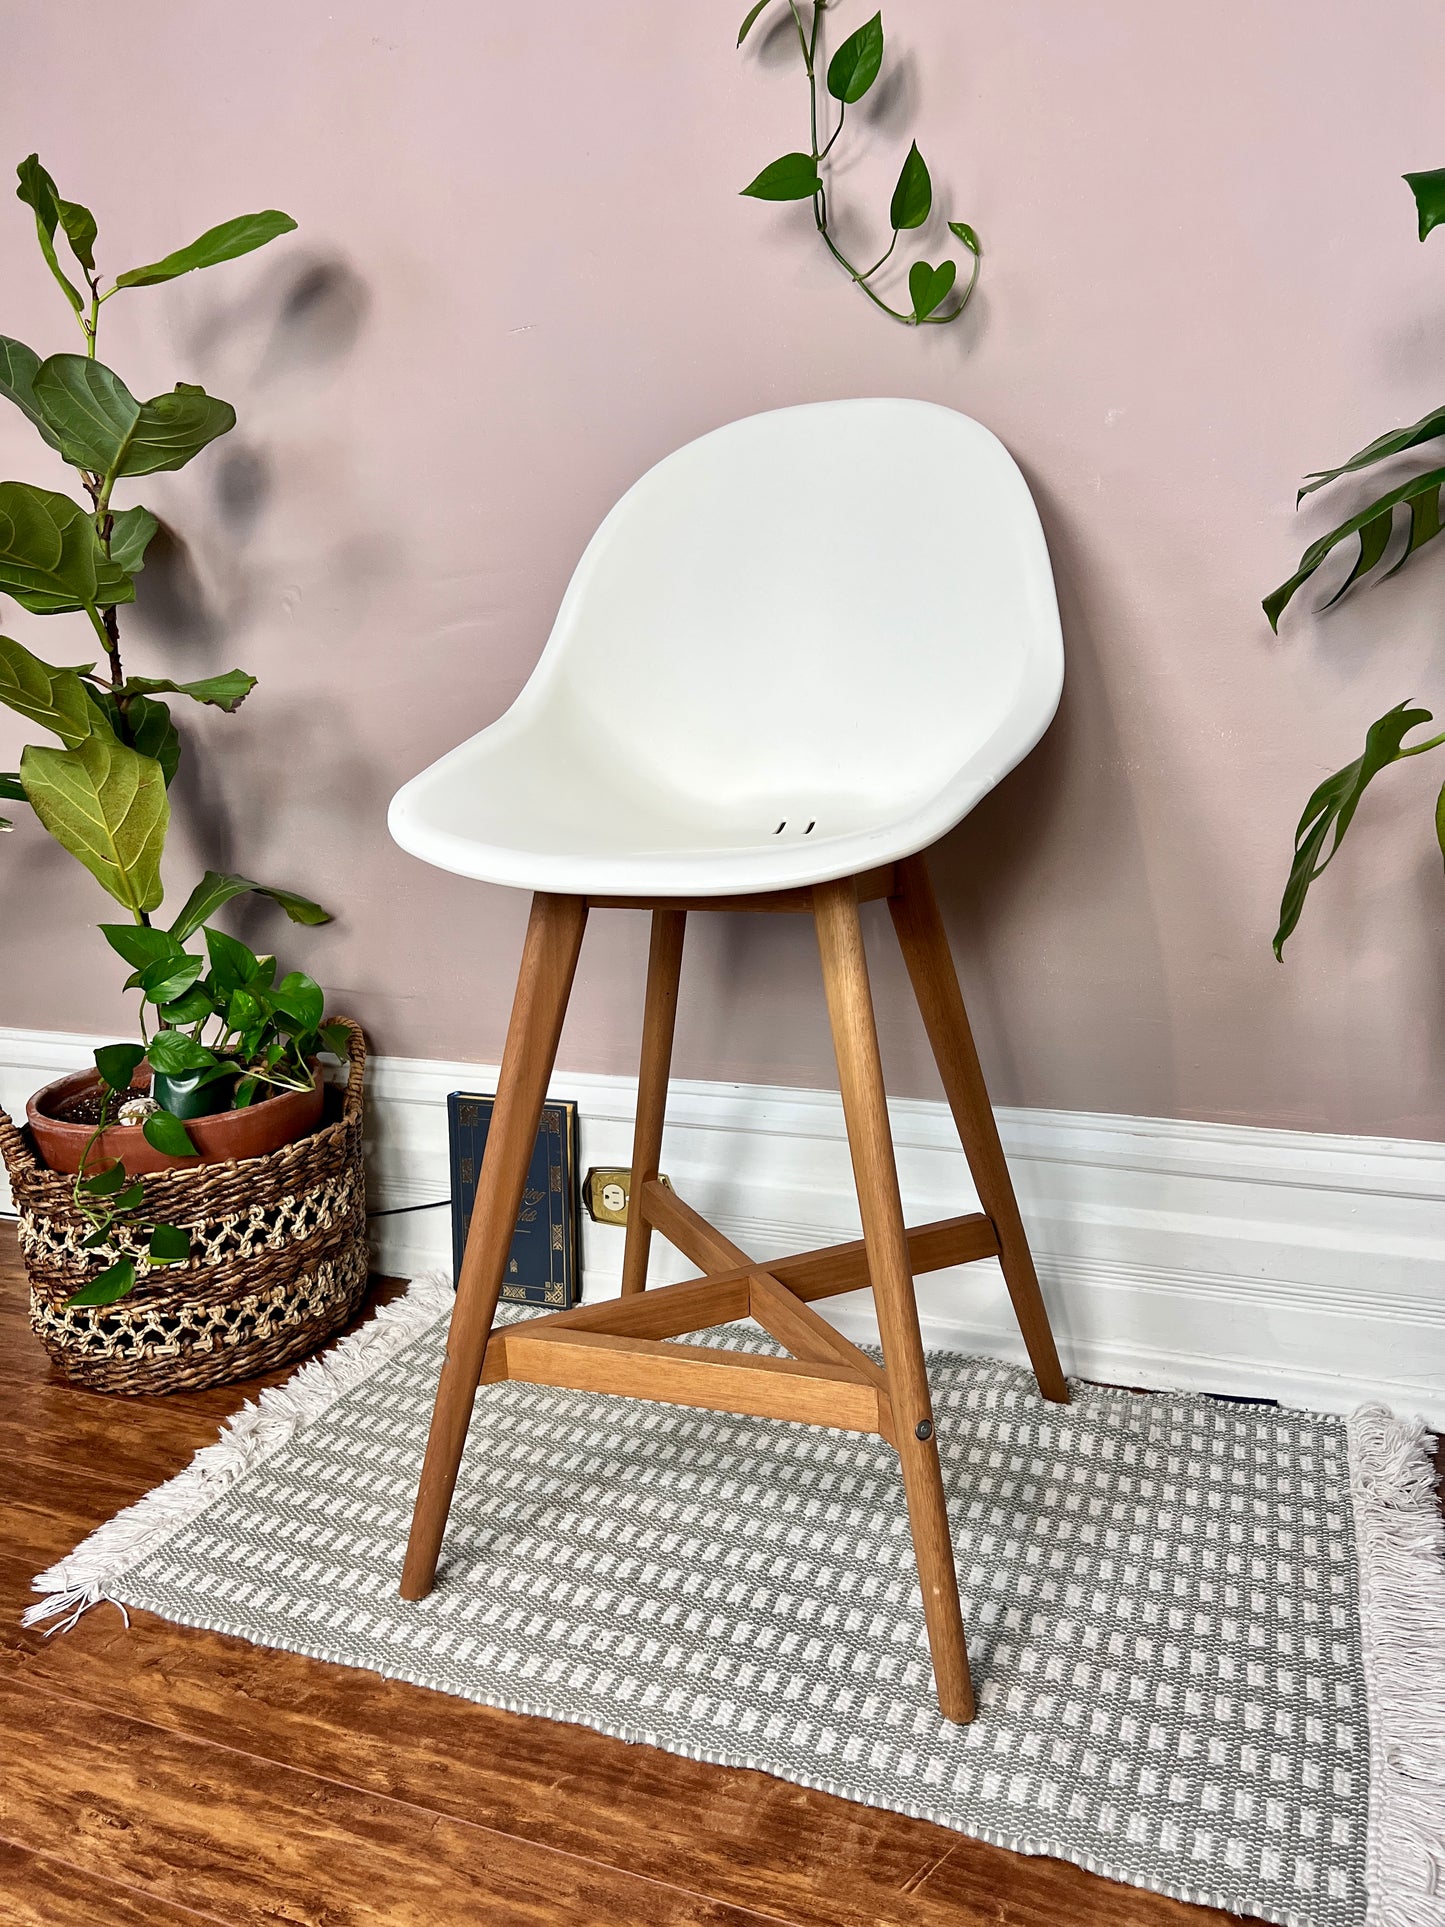 The Fanbyn Kitchen Counter Stools